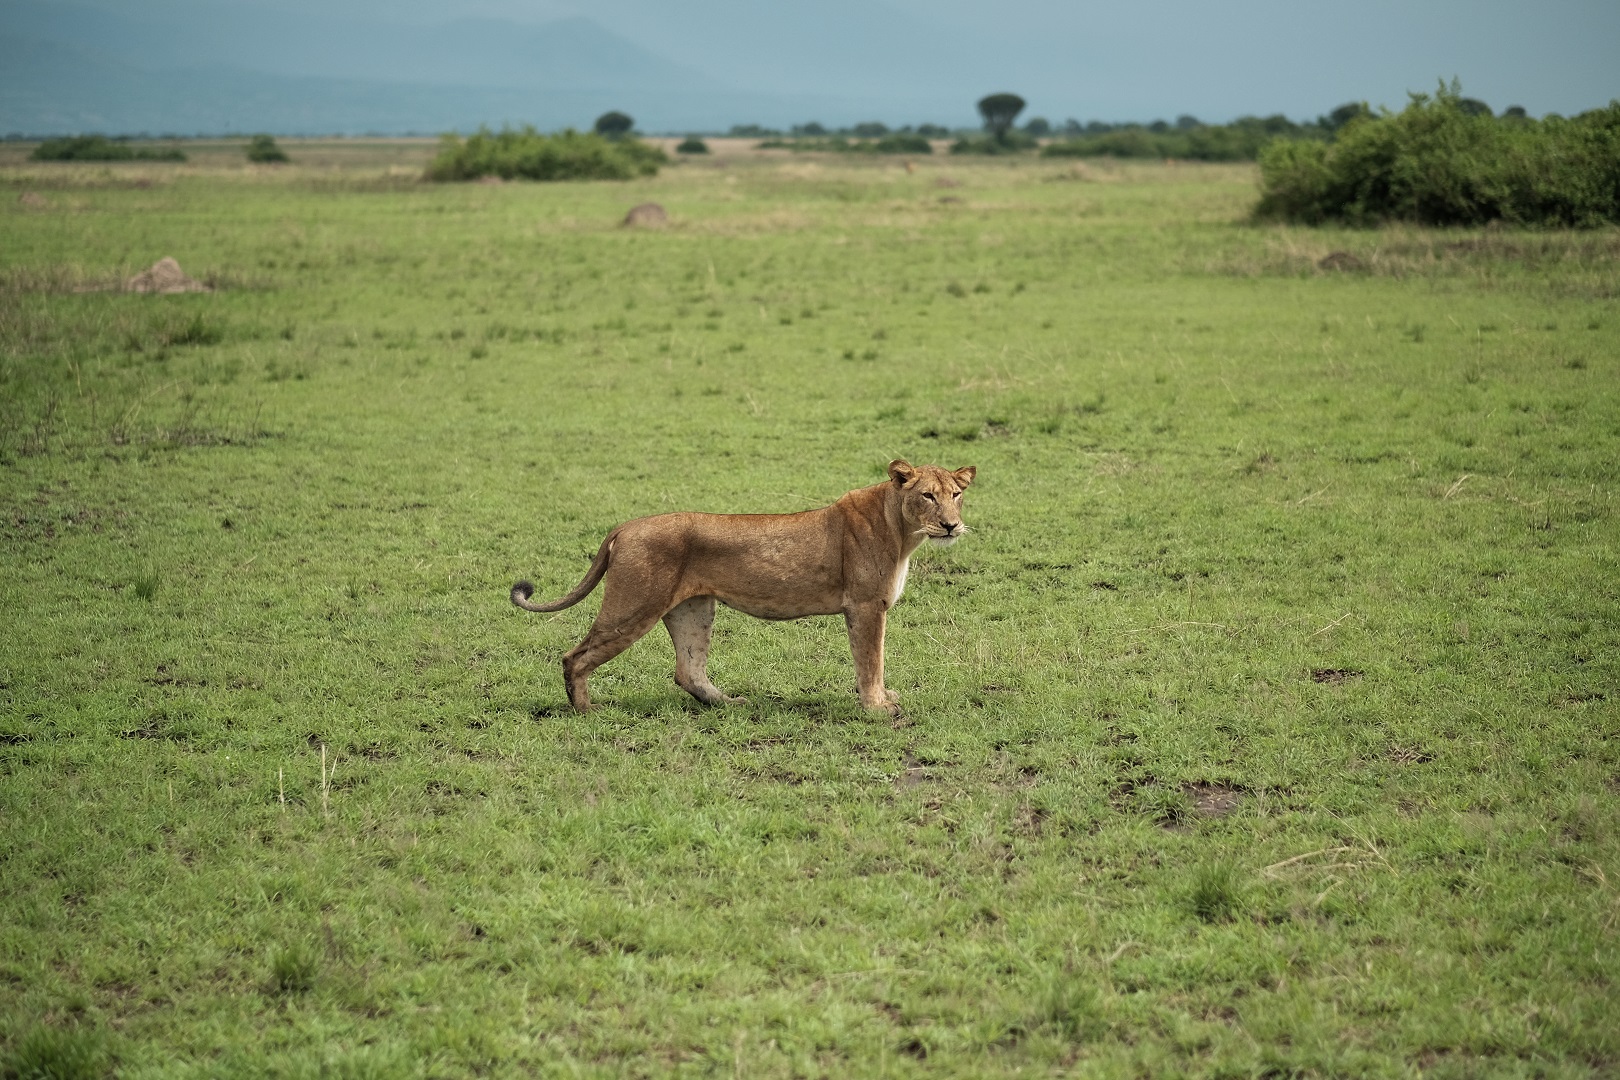 A female lion spotted in Kasenyi plains, also known as Mweya sector in Queen Elizabeth National Park